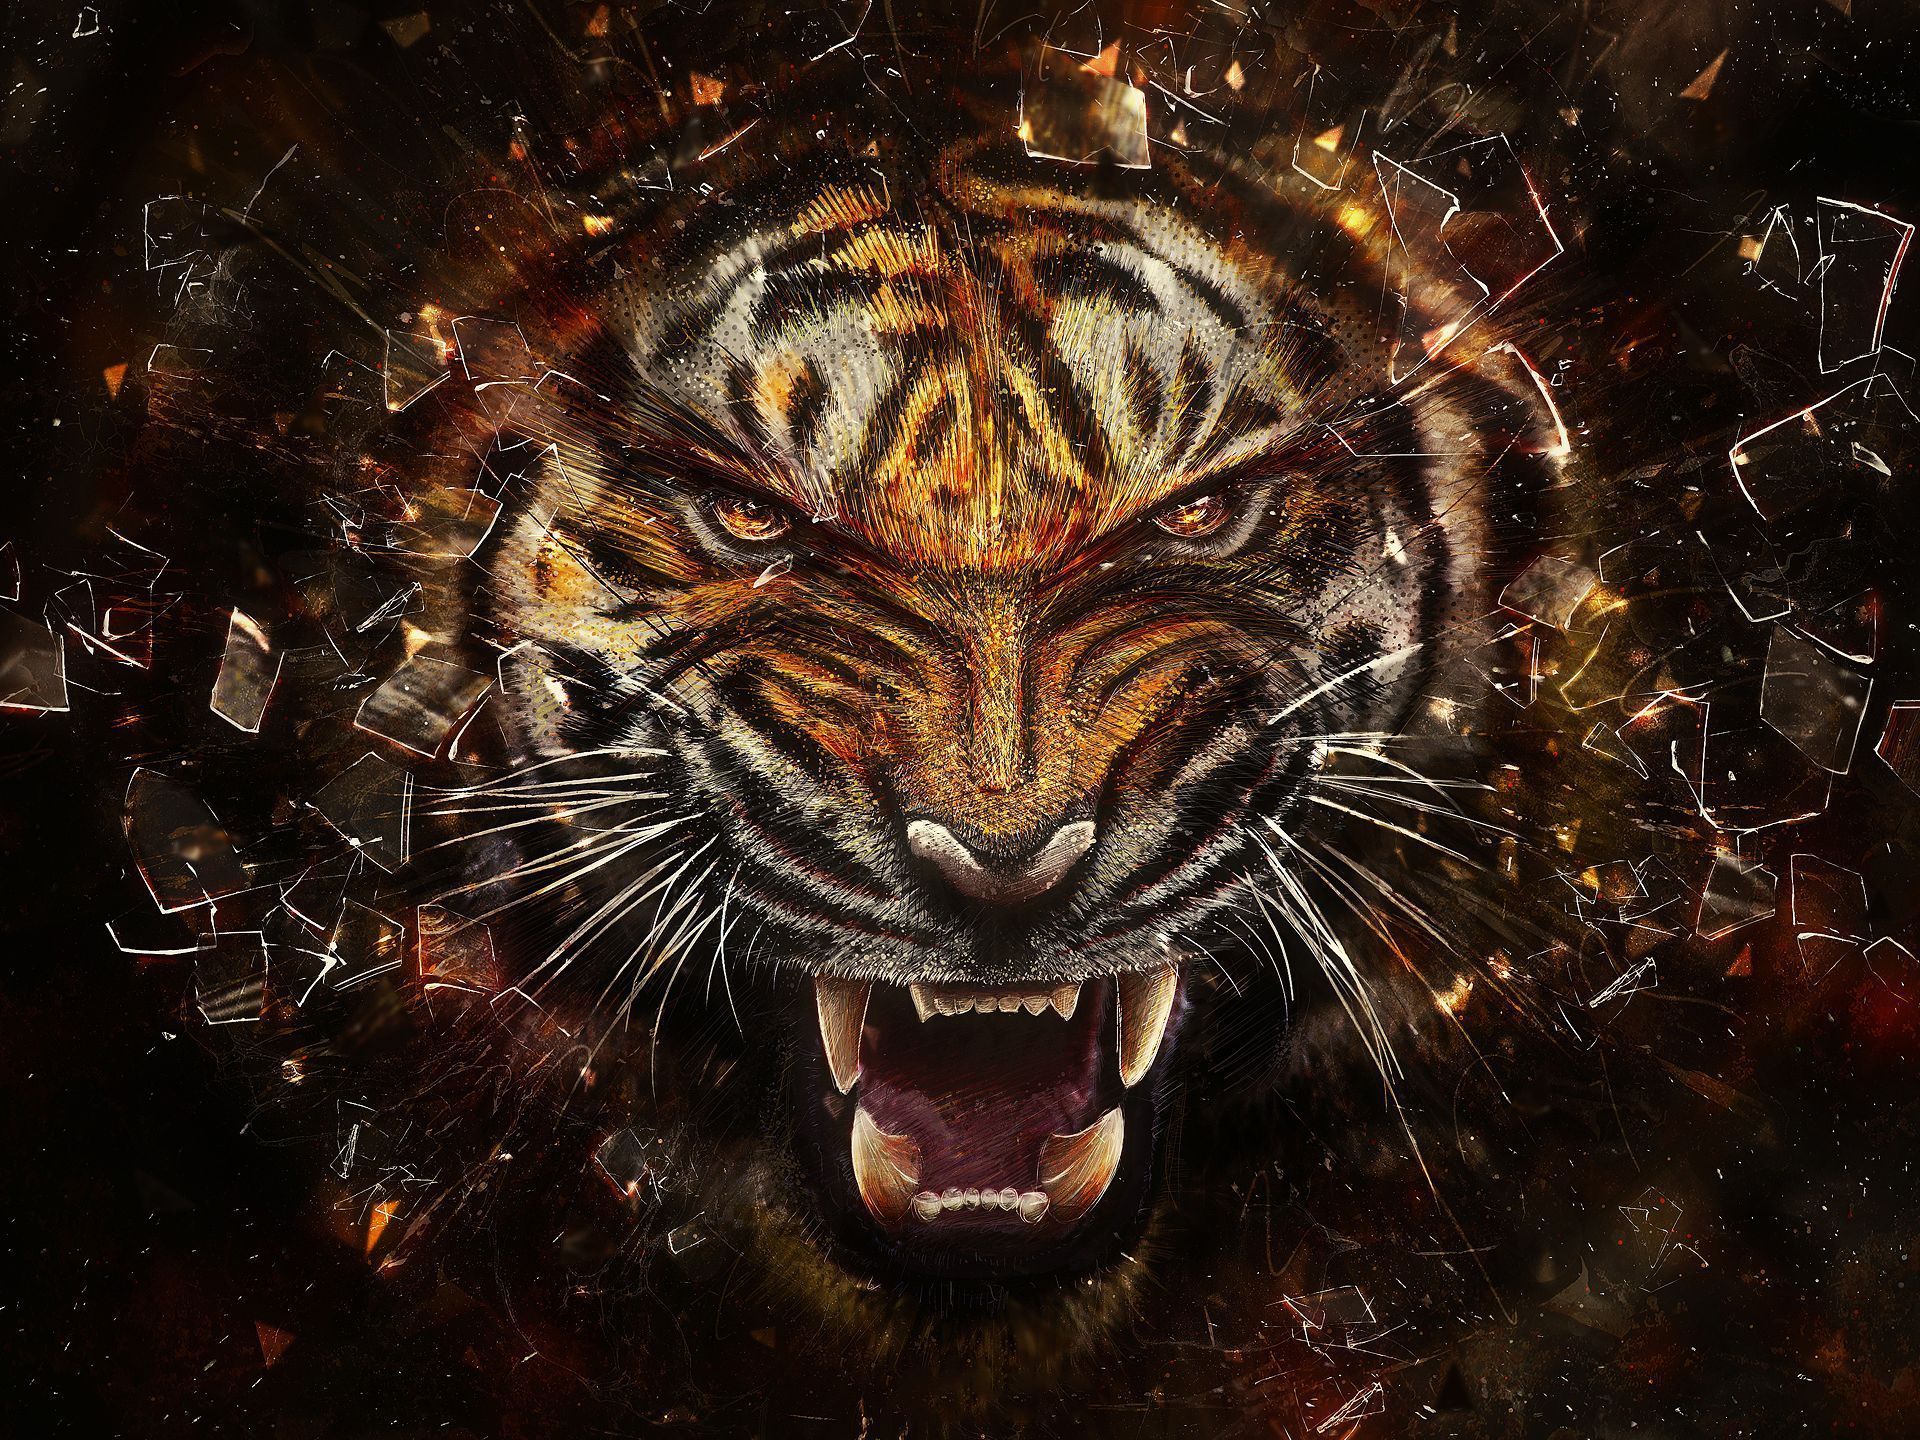 1066 Tiger HD Wallpapers | Backgrounds - Wallpaper Abyss